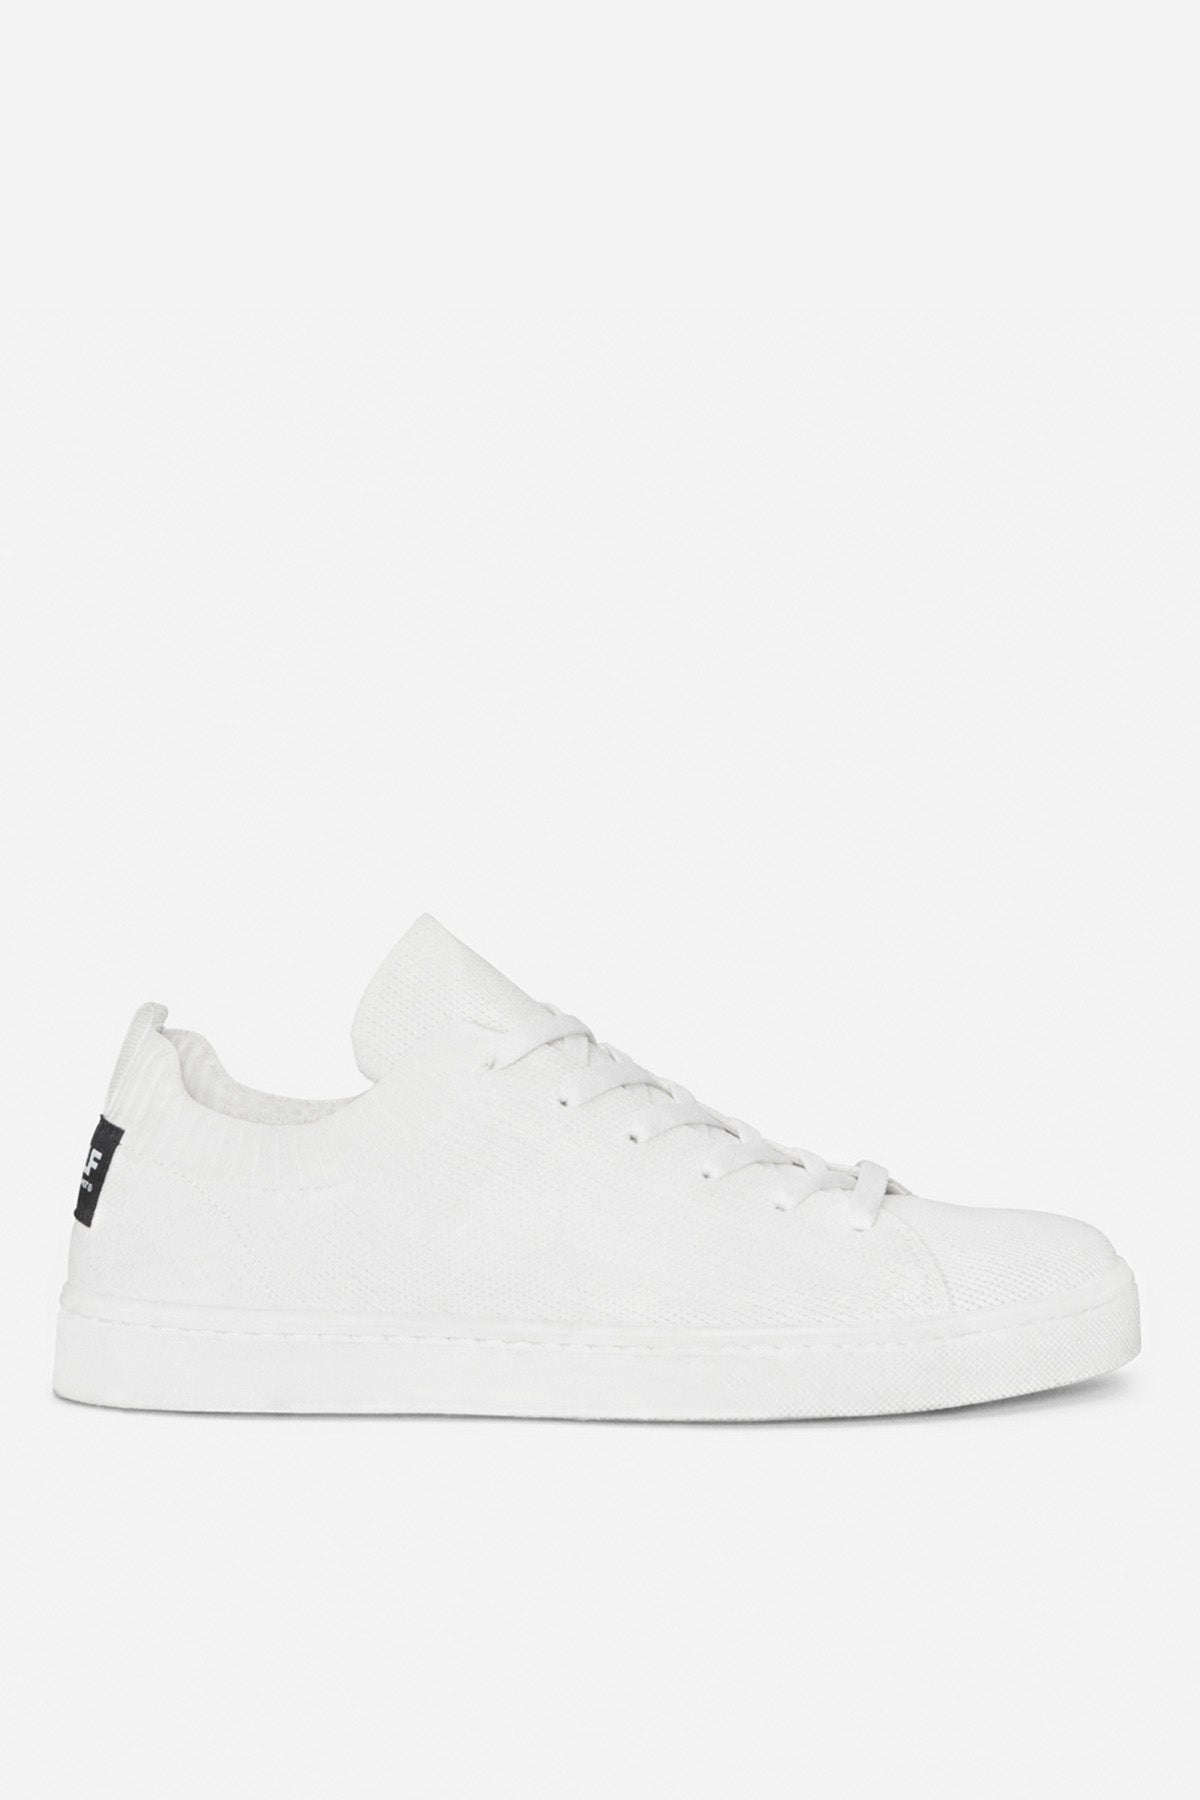 SANDFORD KNIT TRAINERS WHITE